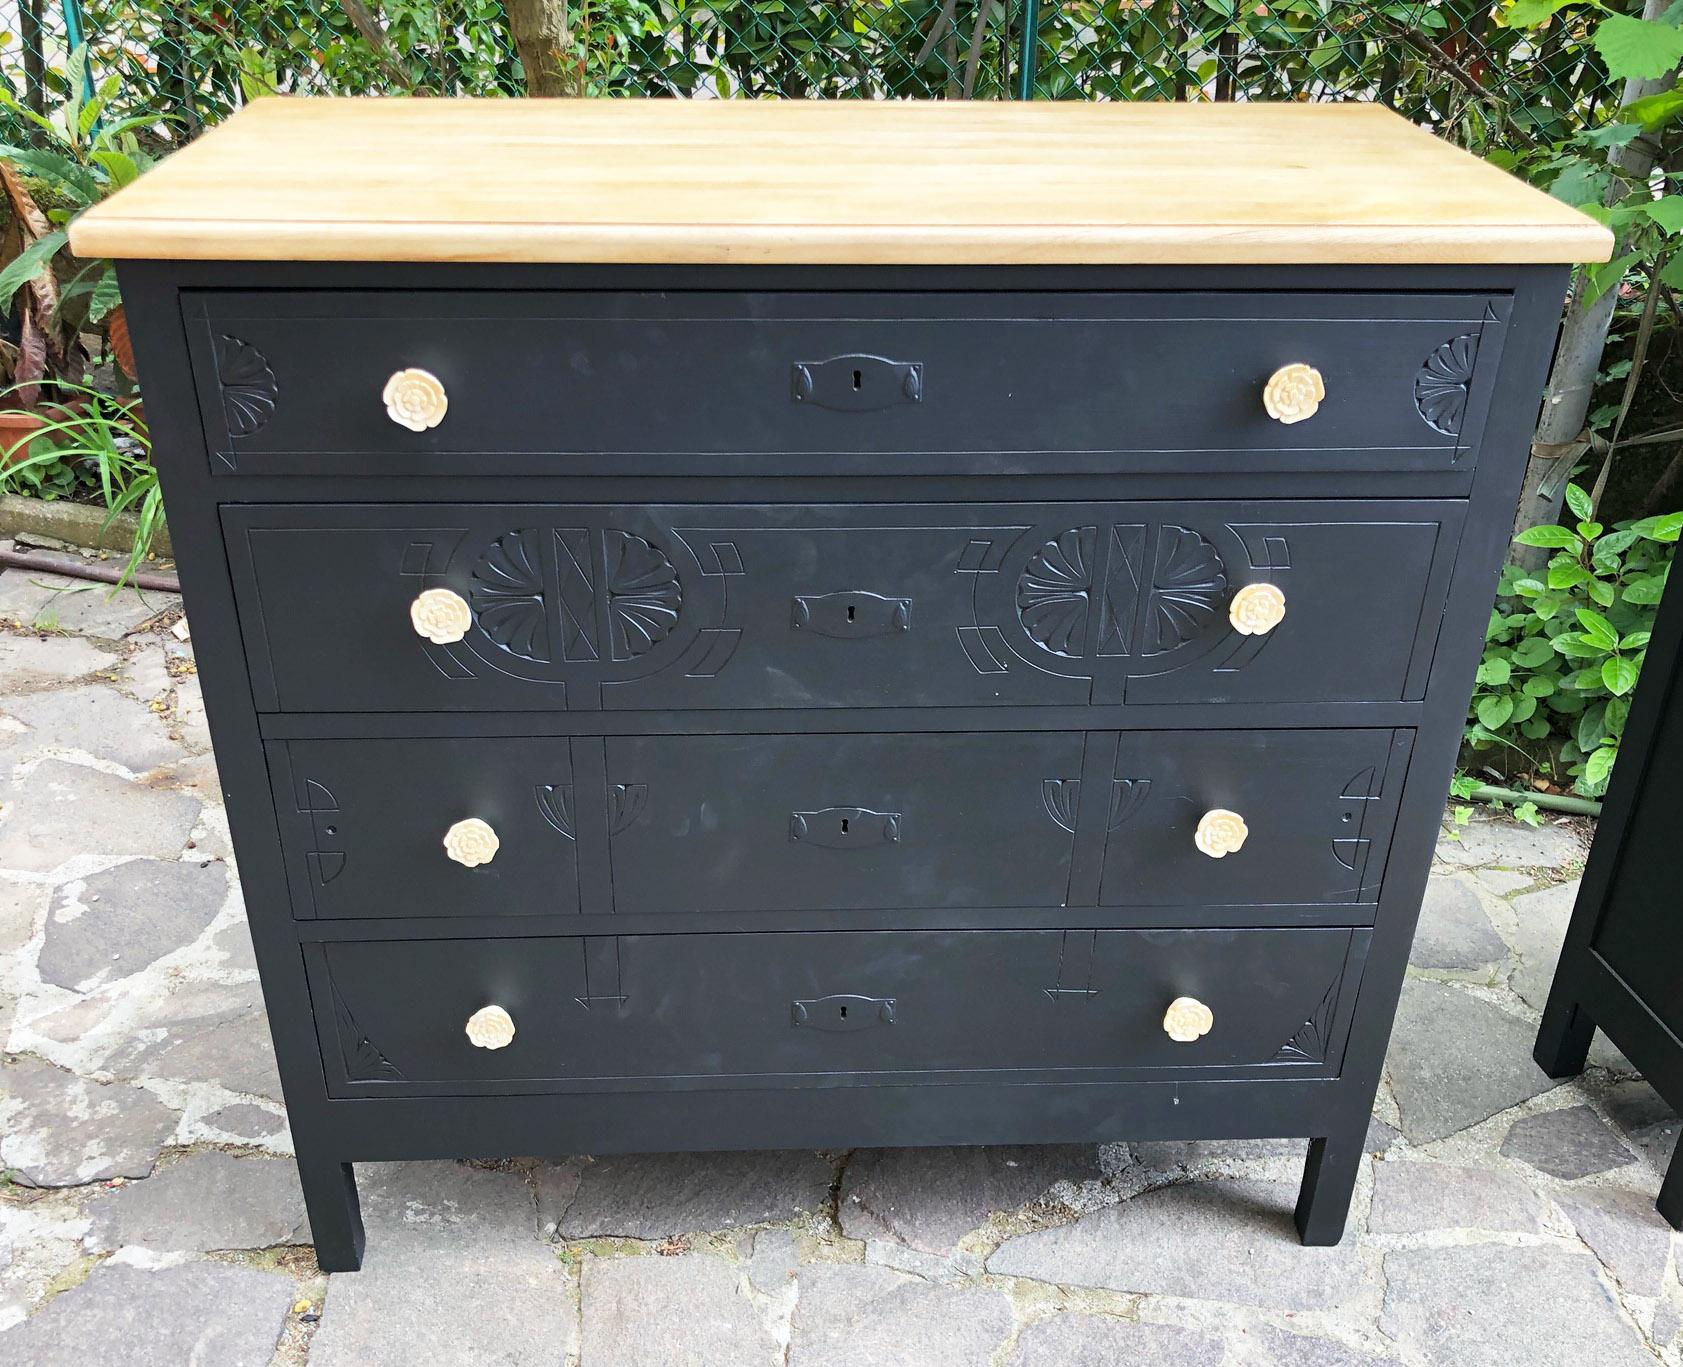 Italian Art Nouveau 1920 set of dresser and two custom night stands, hand carved.
Original set consisting of right and left nightstand with coordinated chest of drawers, customized black color and light top, special handles.
The furniture structure